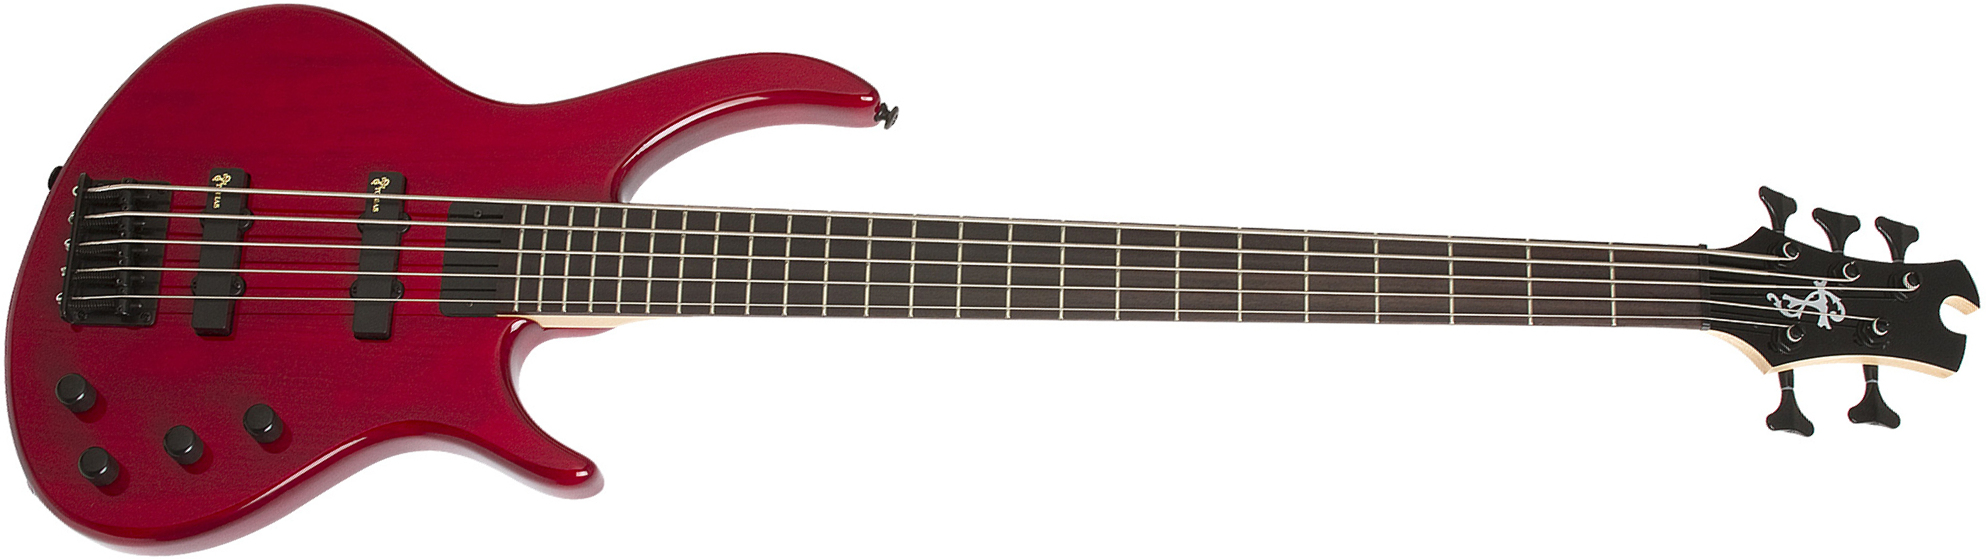 Epiphone Toby Deluxe V Bass Bh - Trans Red - Solidbody E-bass - Main picture